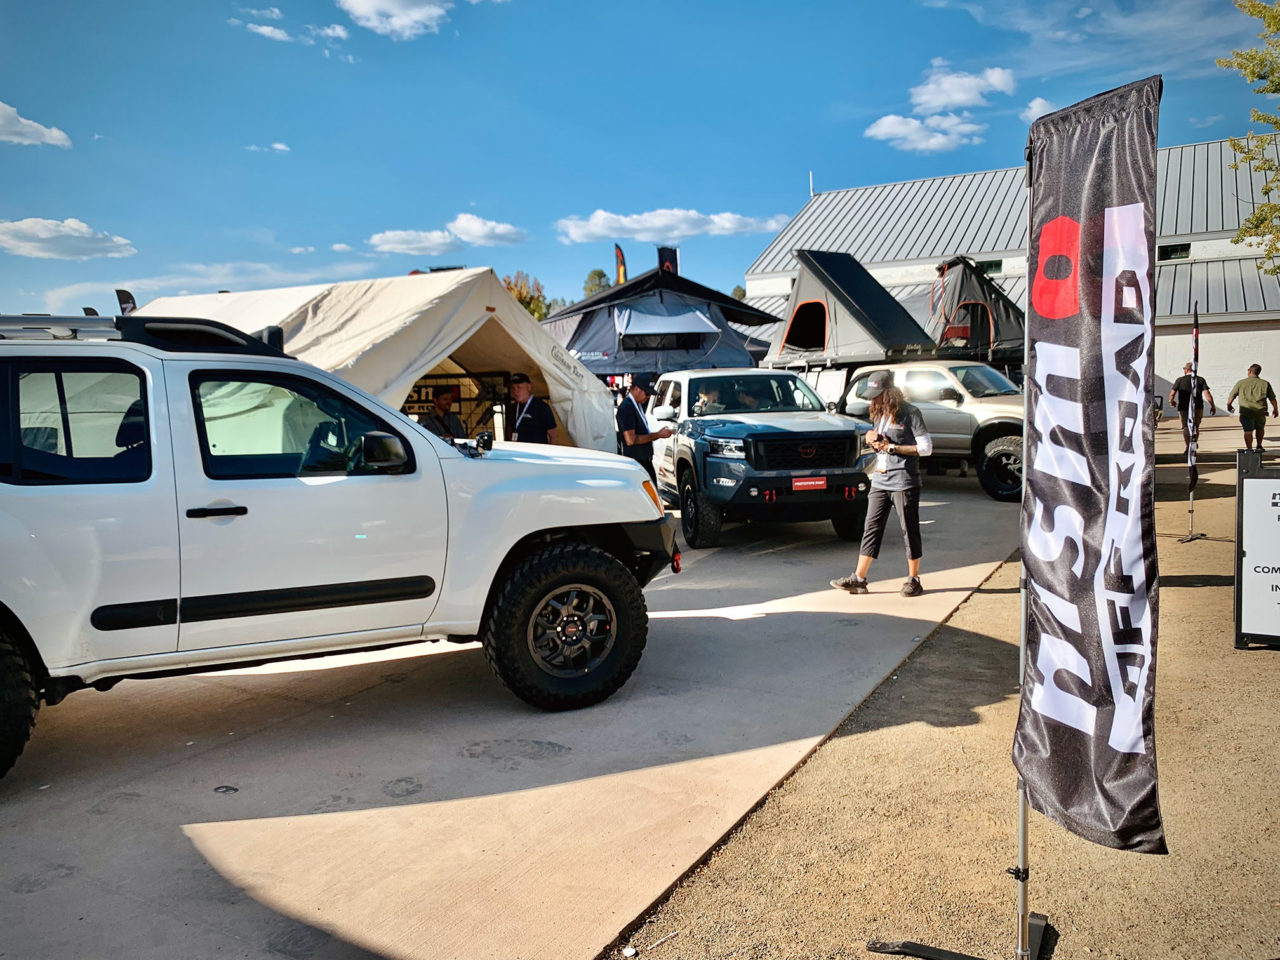 Nissan NISMO display at Overland Expo West 2021